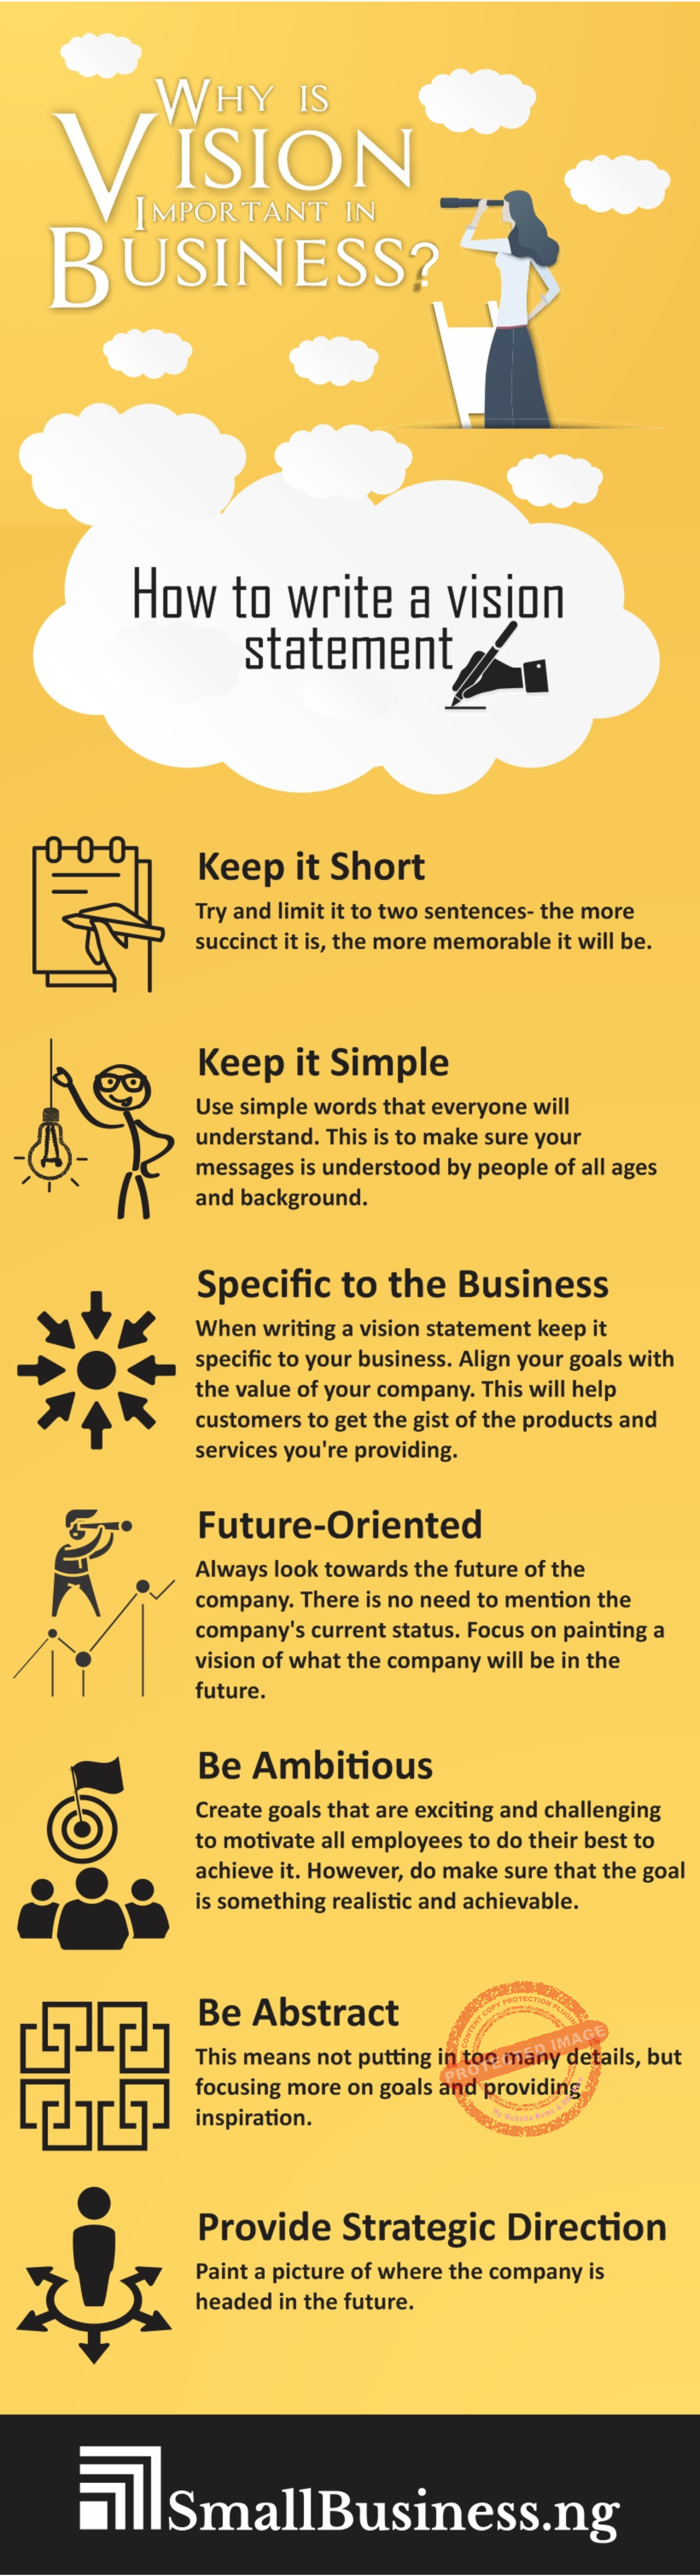 Why is vision important in business infographic